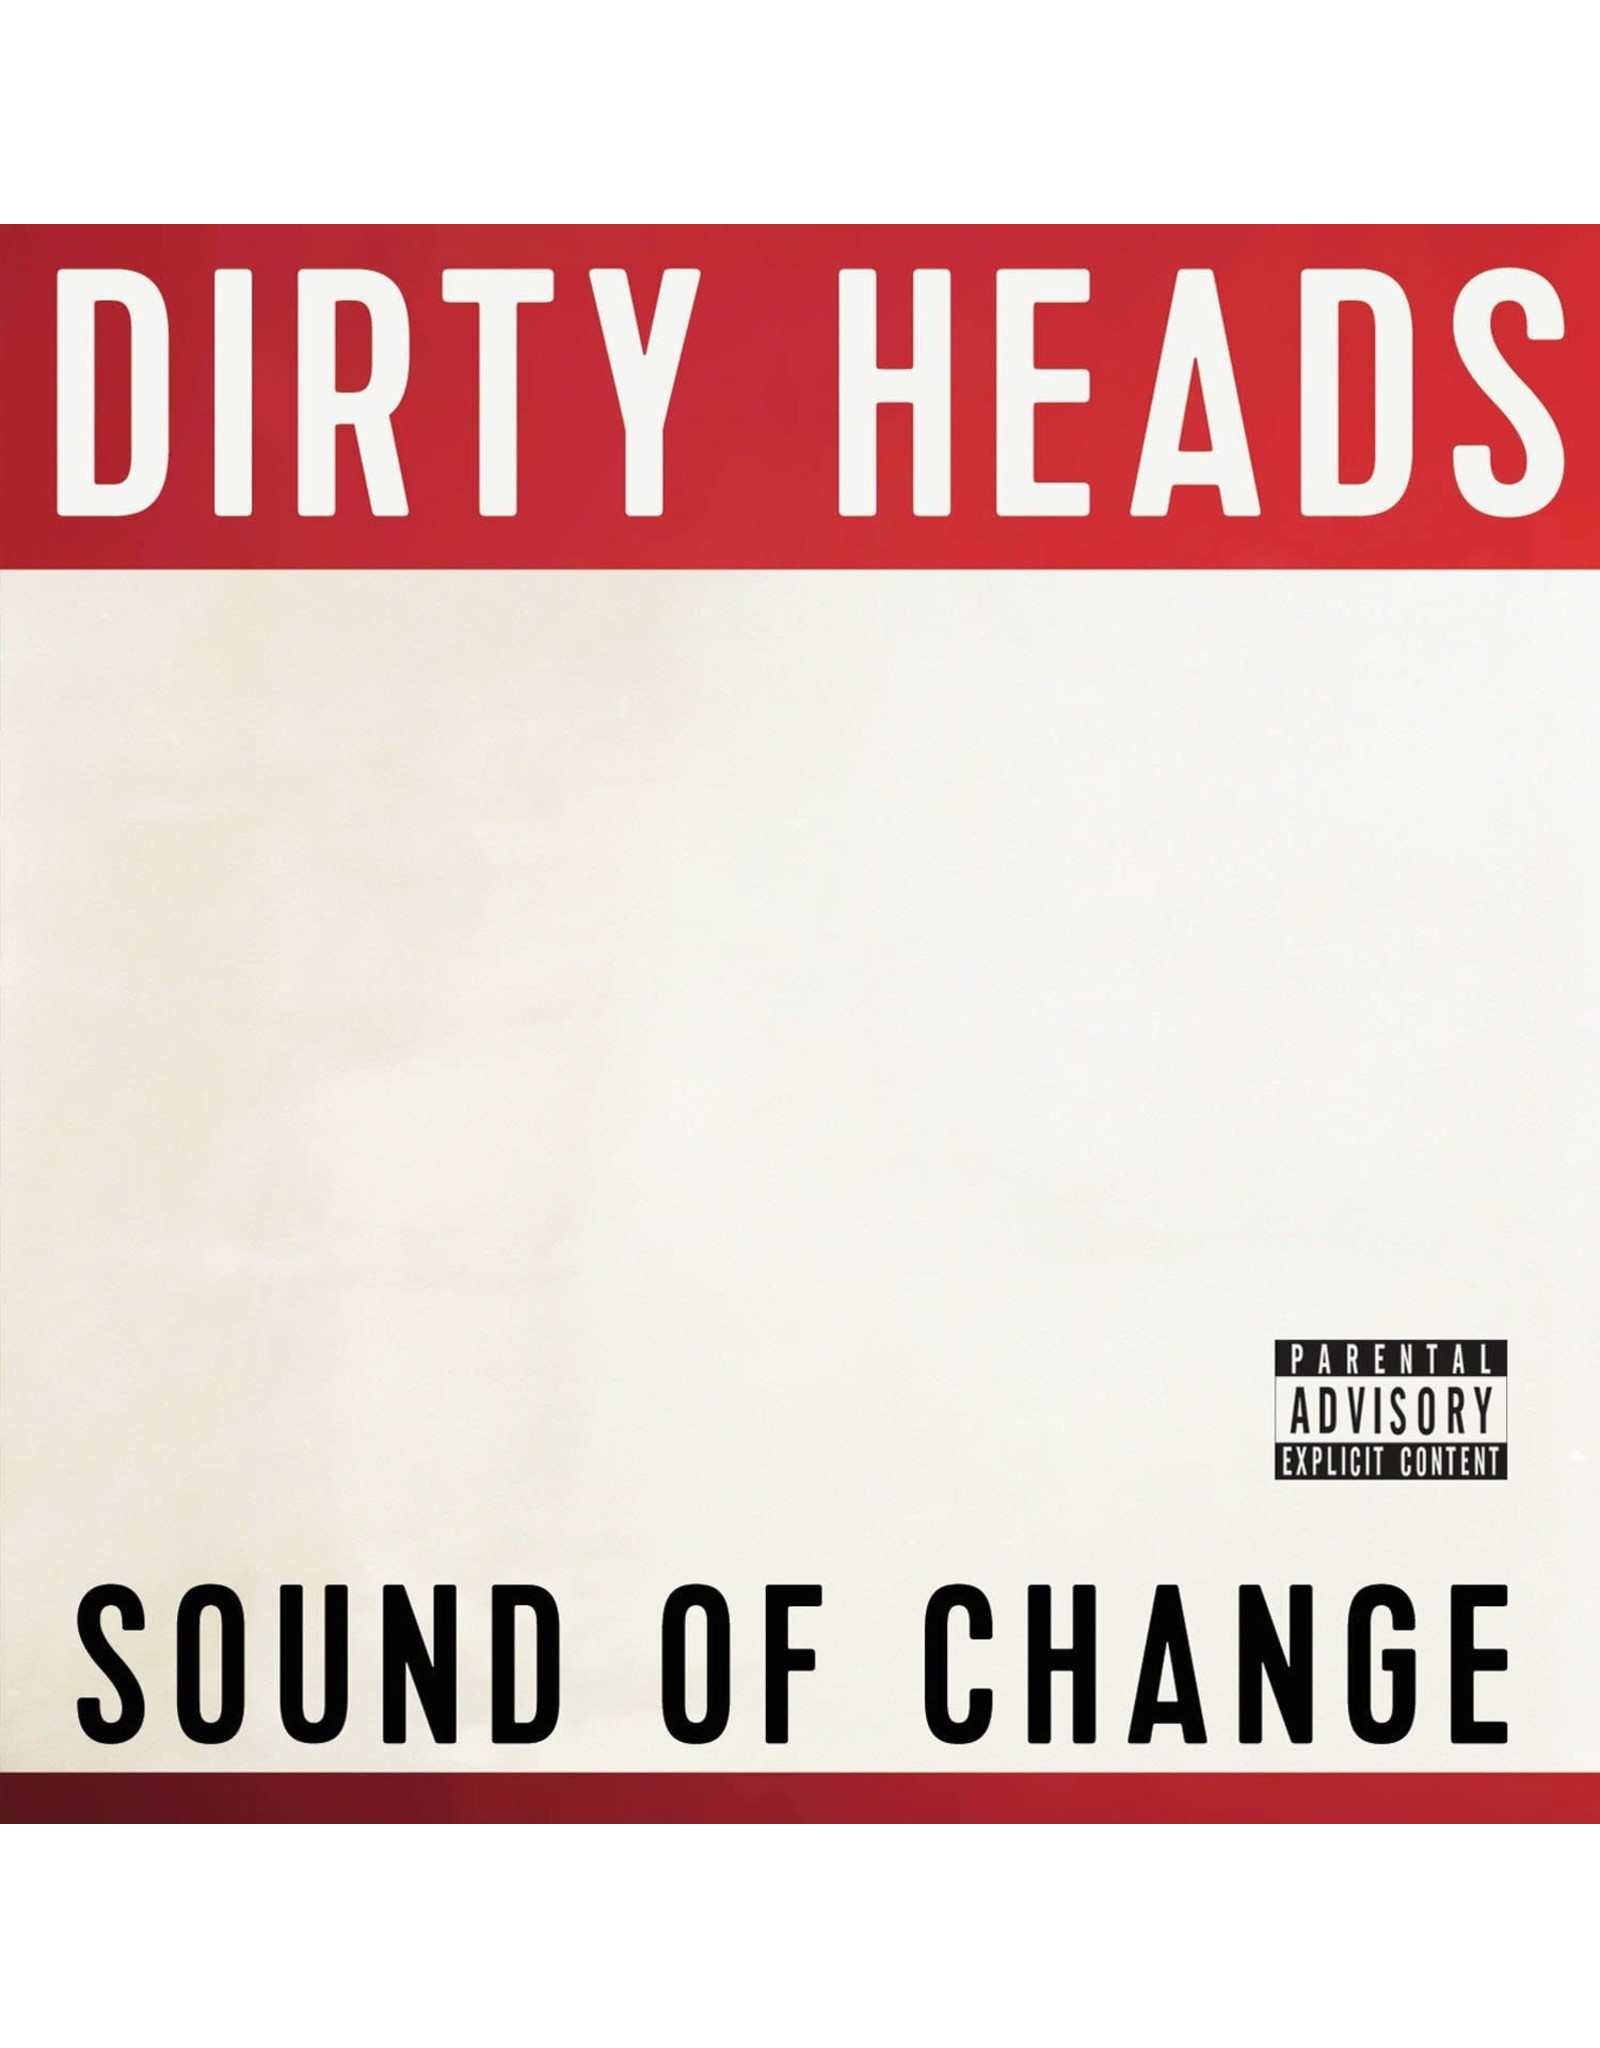 Dirty Heads - Sound Of Change